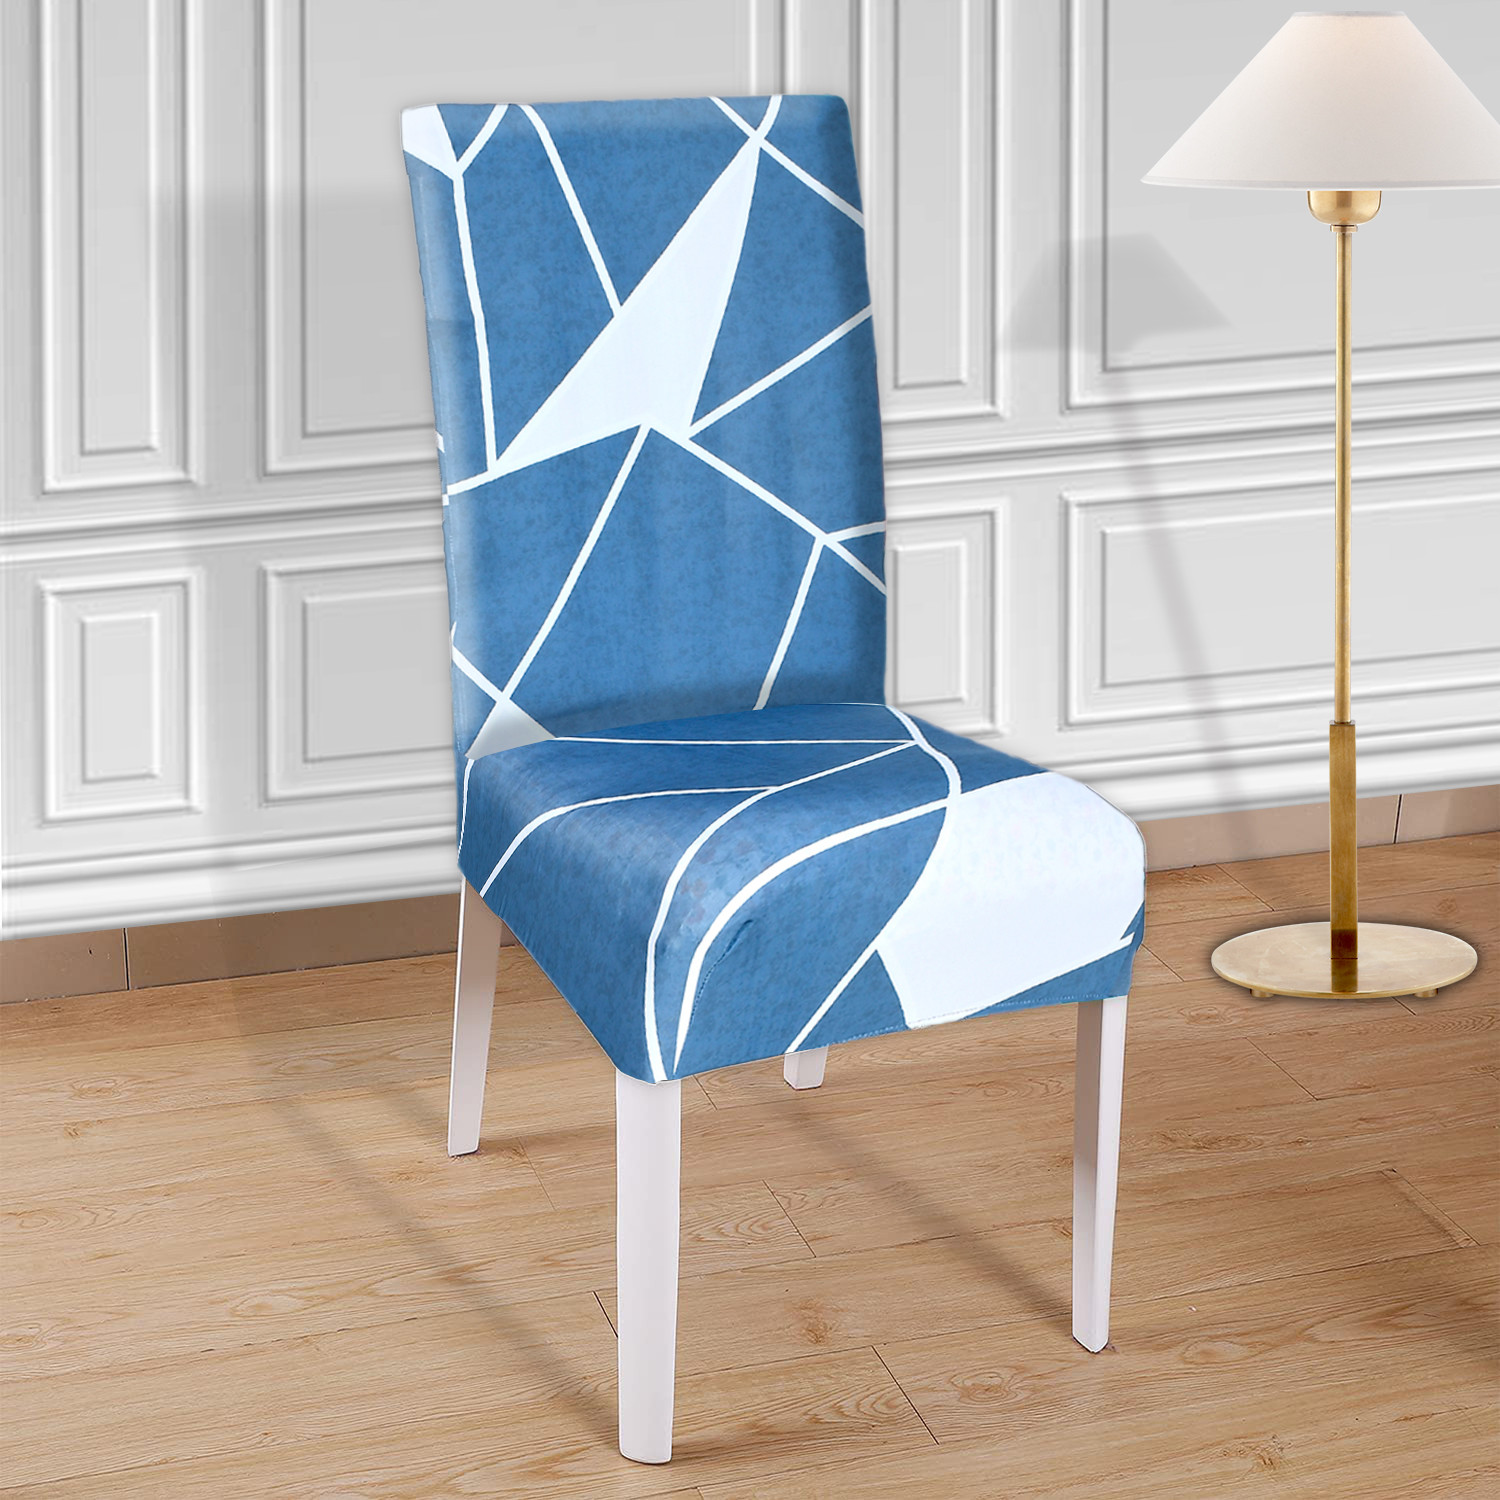 Kuber Industries Lining Printed Elastic Stretchable Polyster Chair Cover For Home, Office, Hotels, Wedding Banquet (Blue)